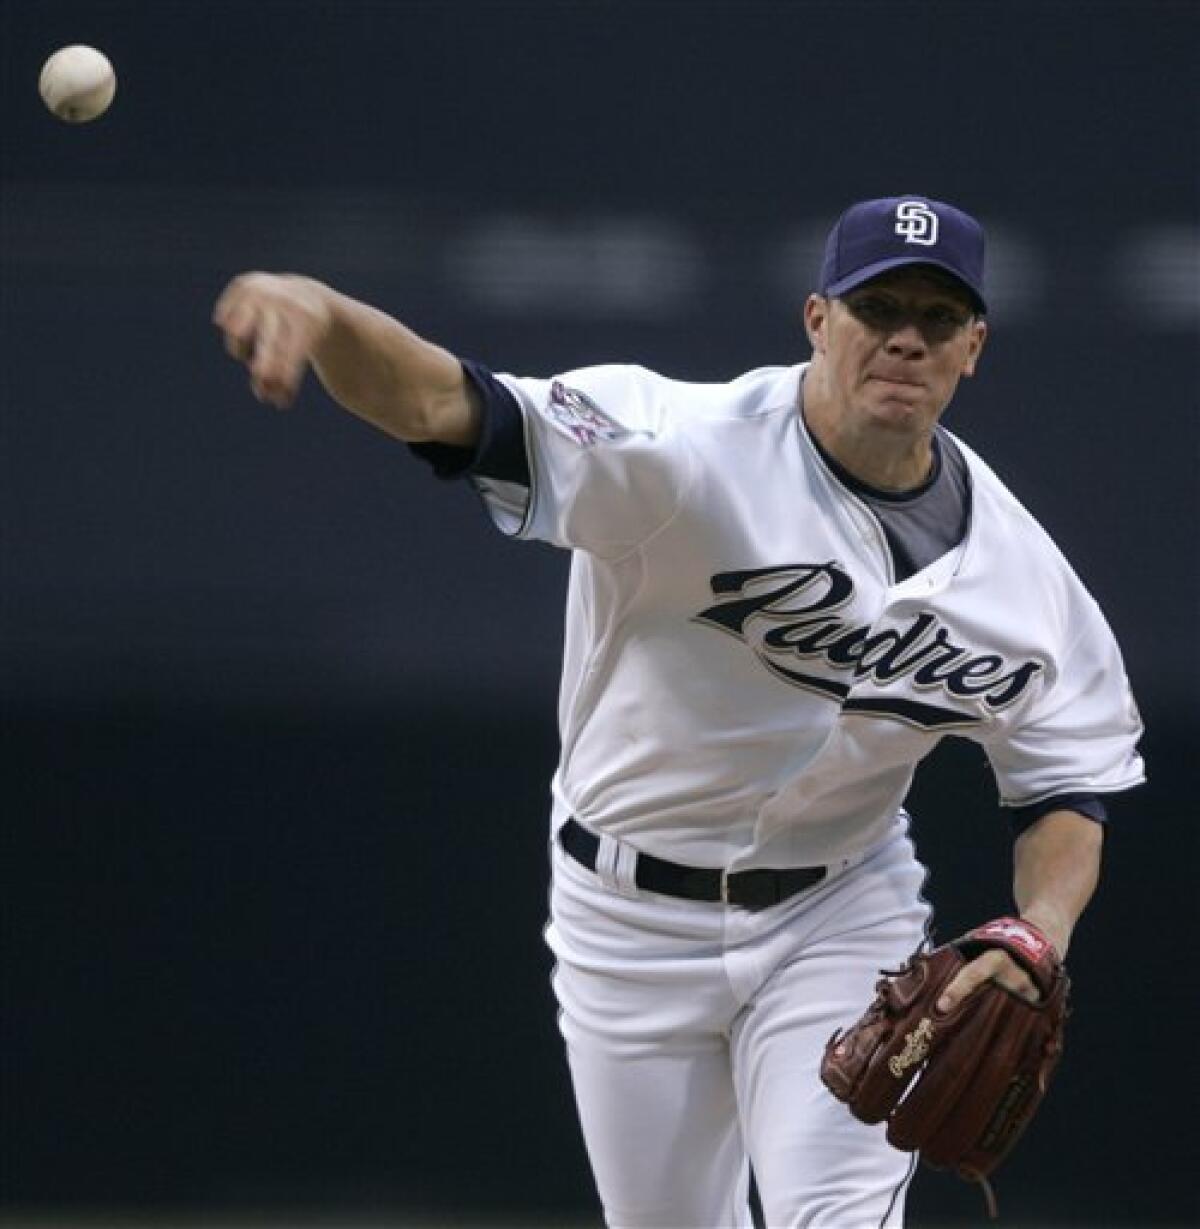 Padres need another Jake Peavy in starting staff